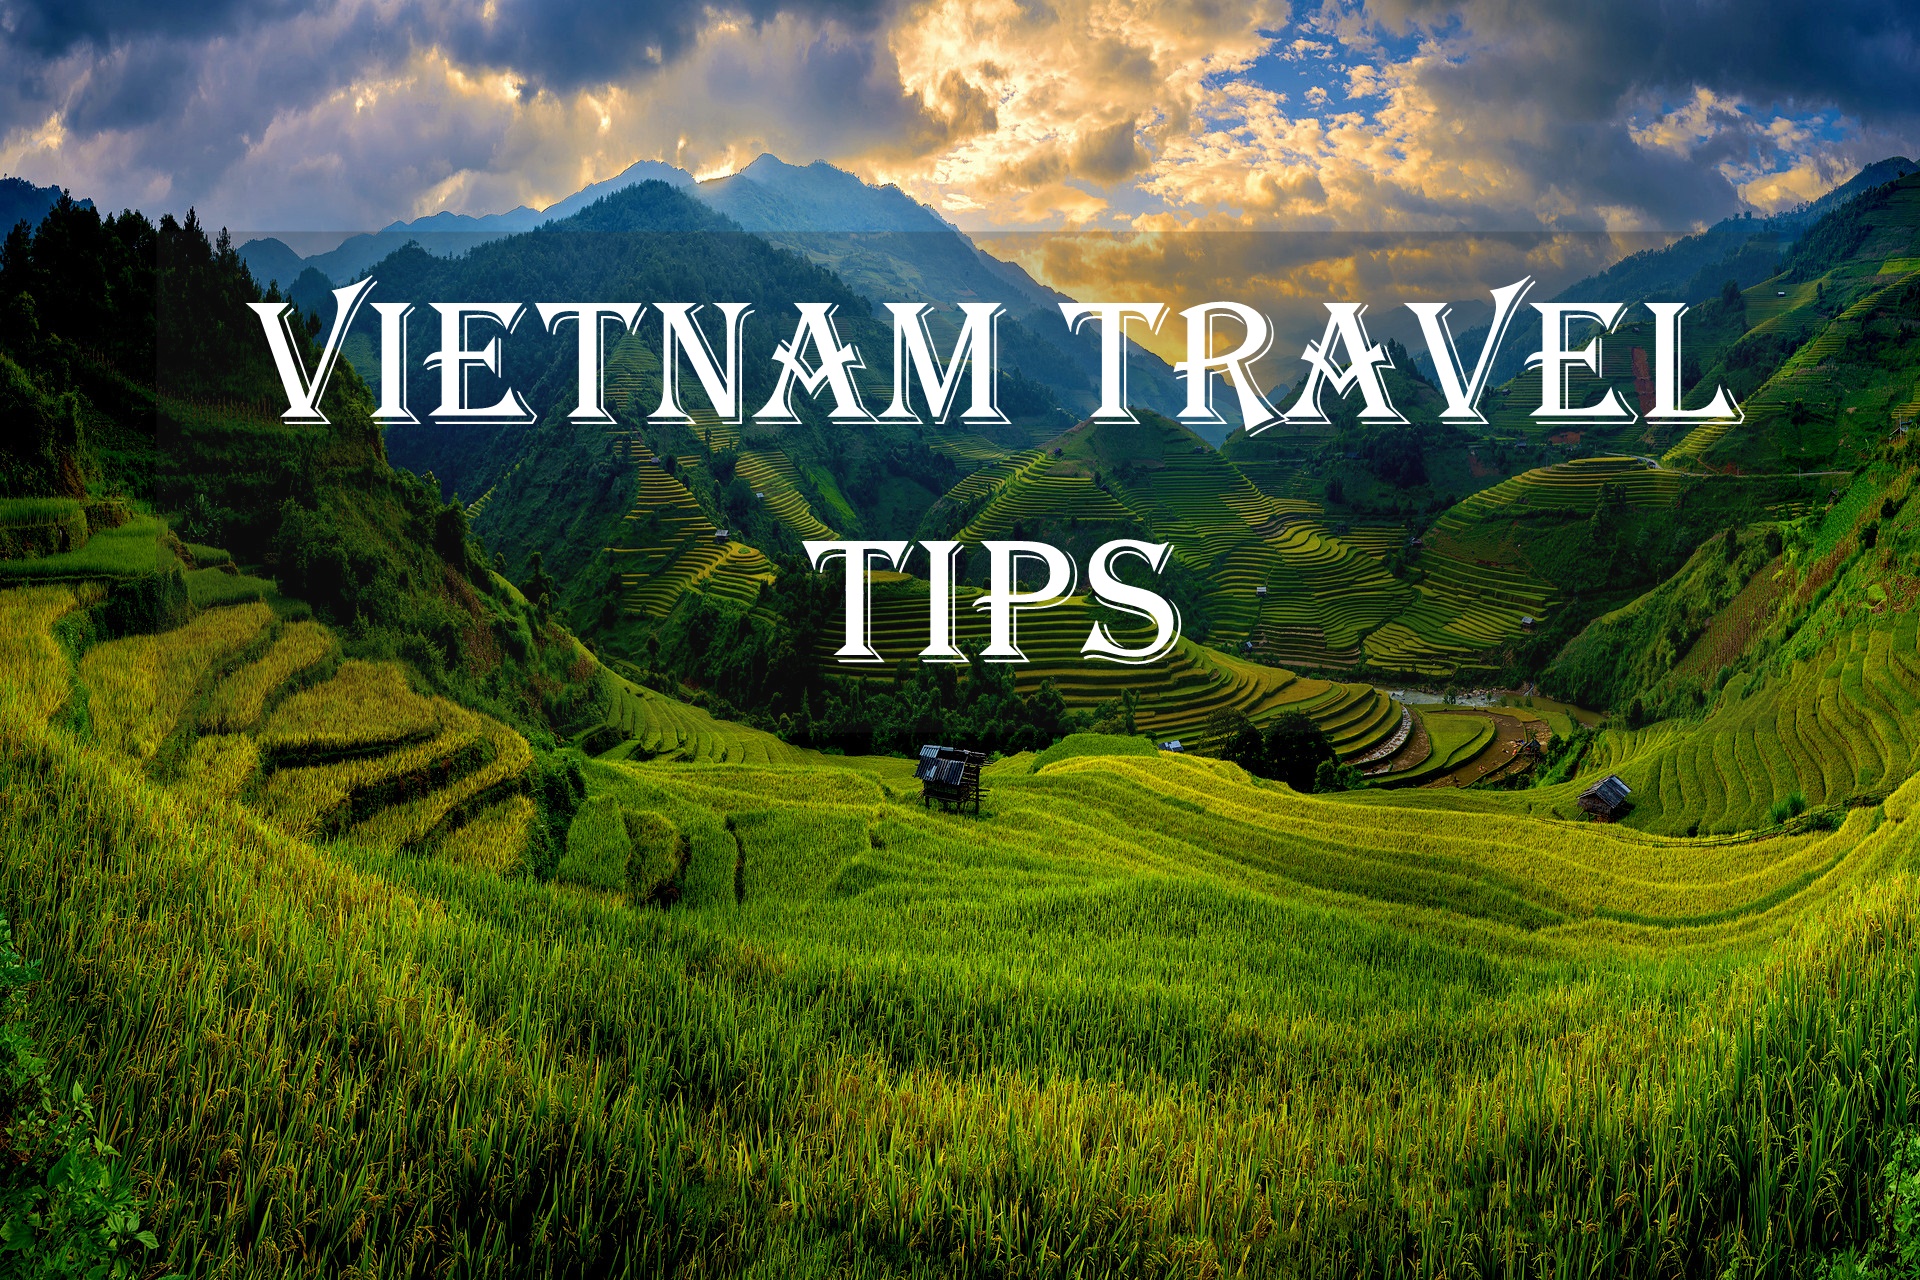 tip for tour guide in vietnam